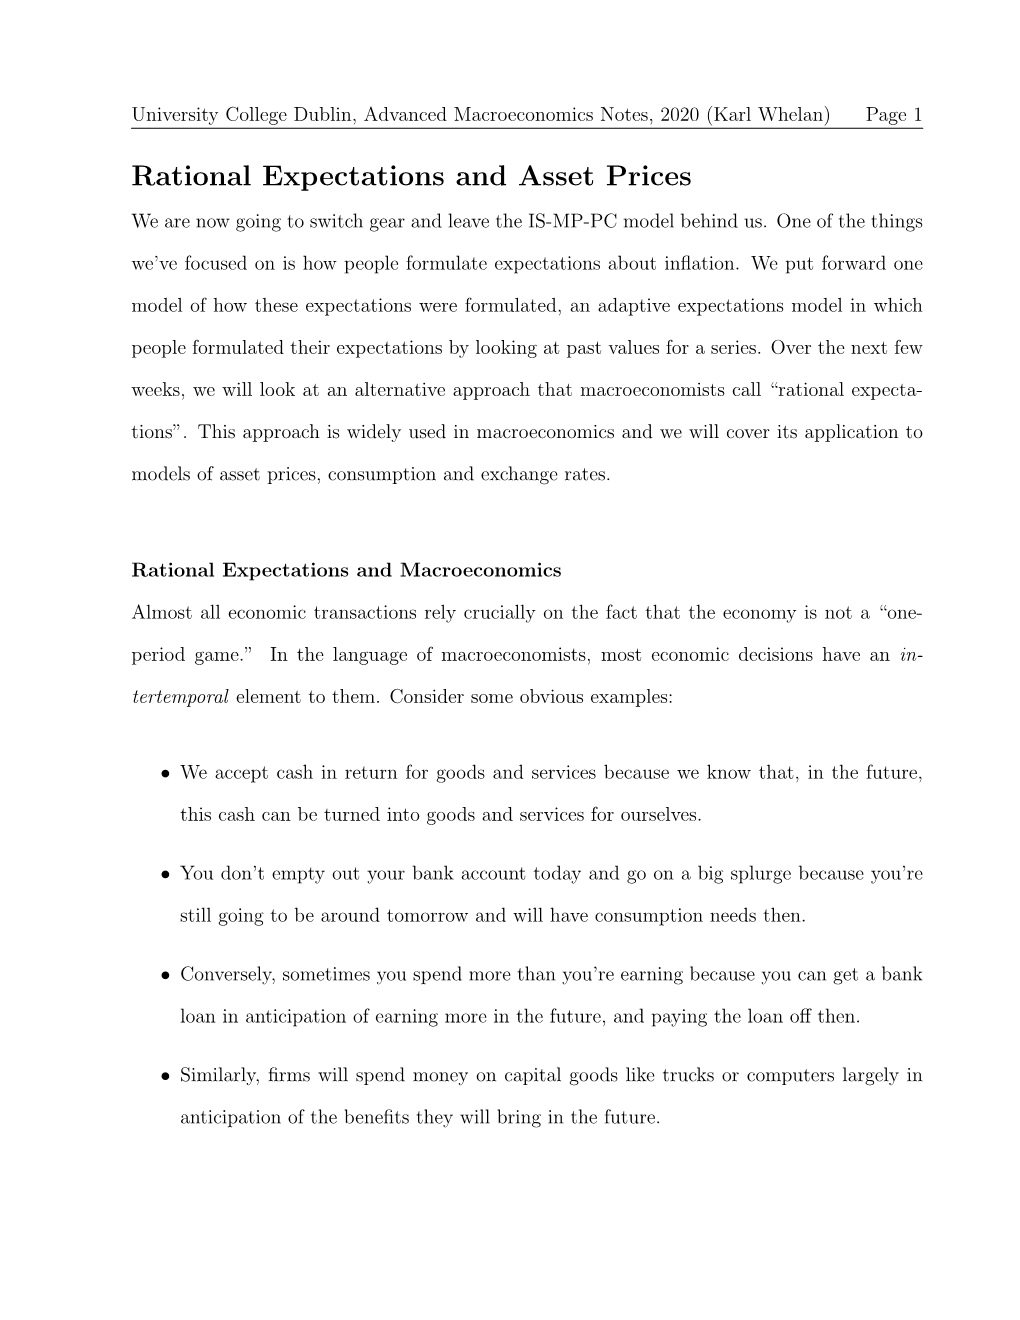 Rational Expectations and Asset Prices